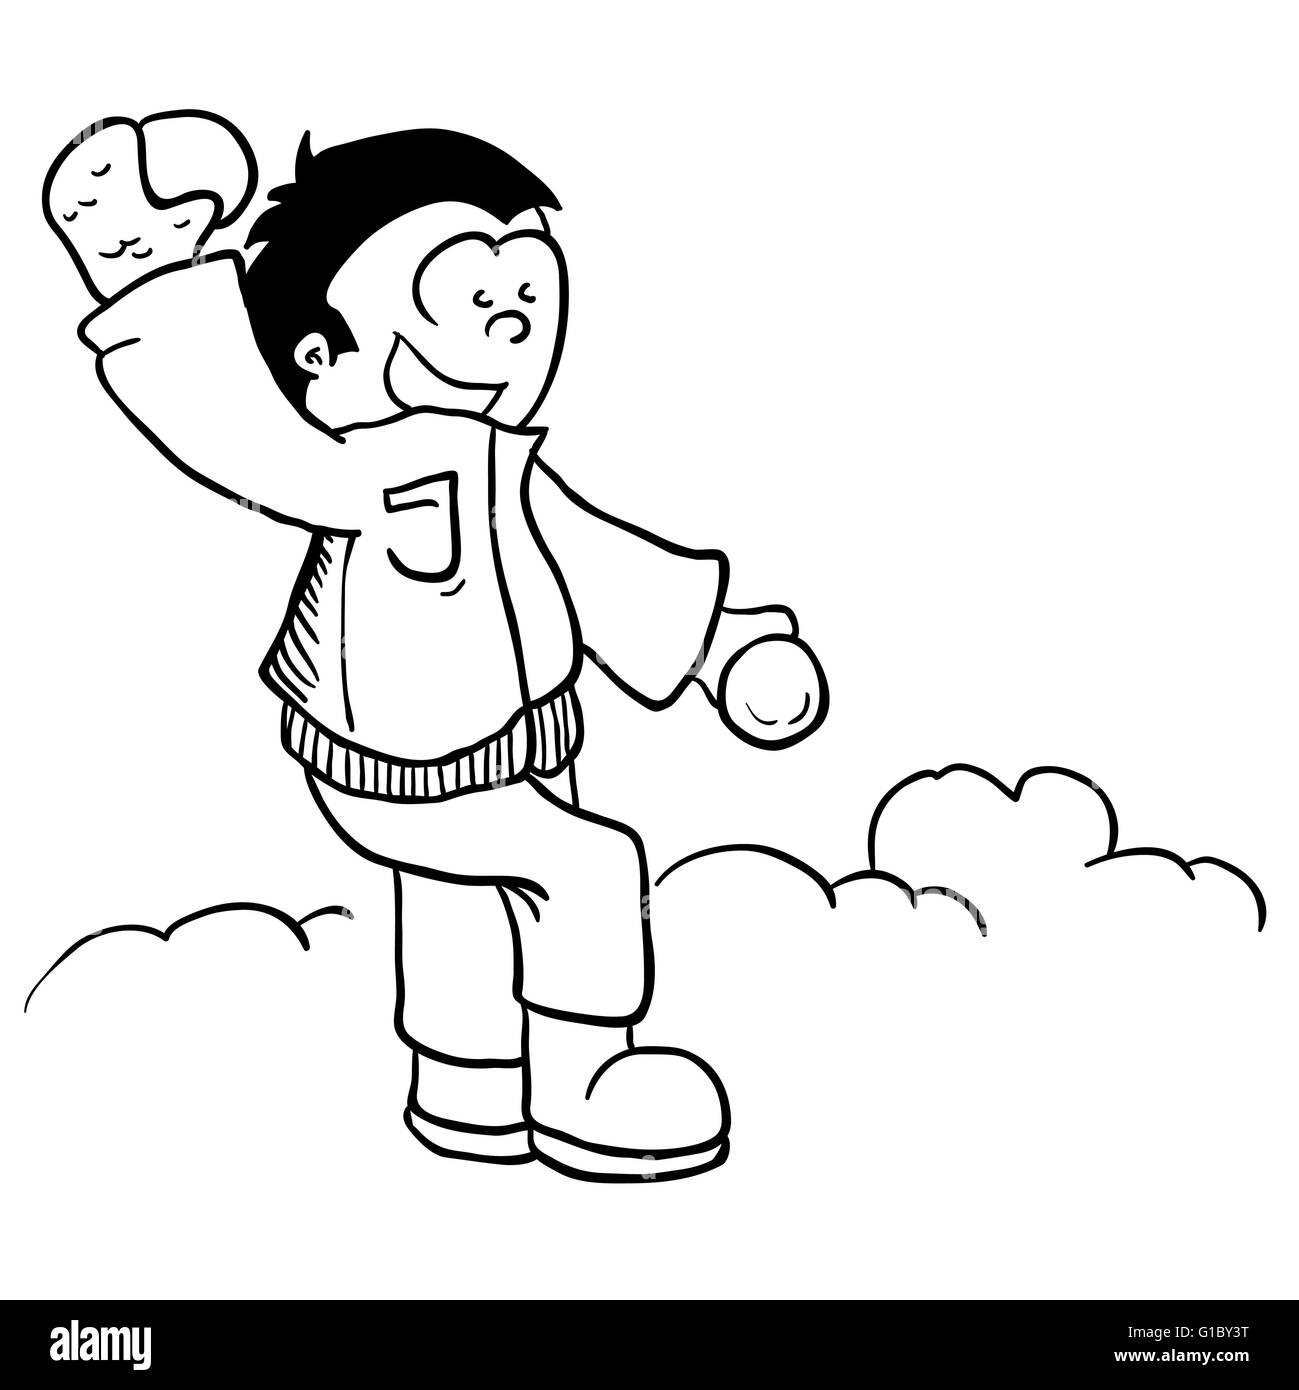 Snowball fight cartoon illustration black and white stock photos images